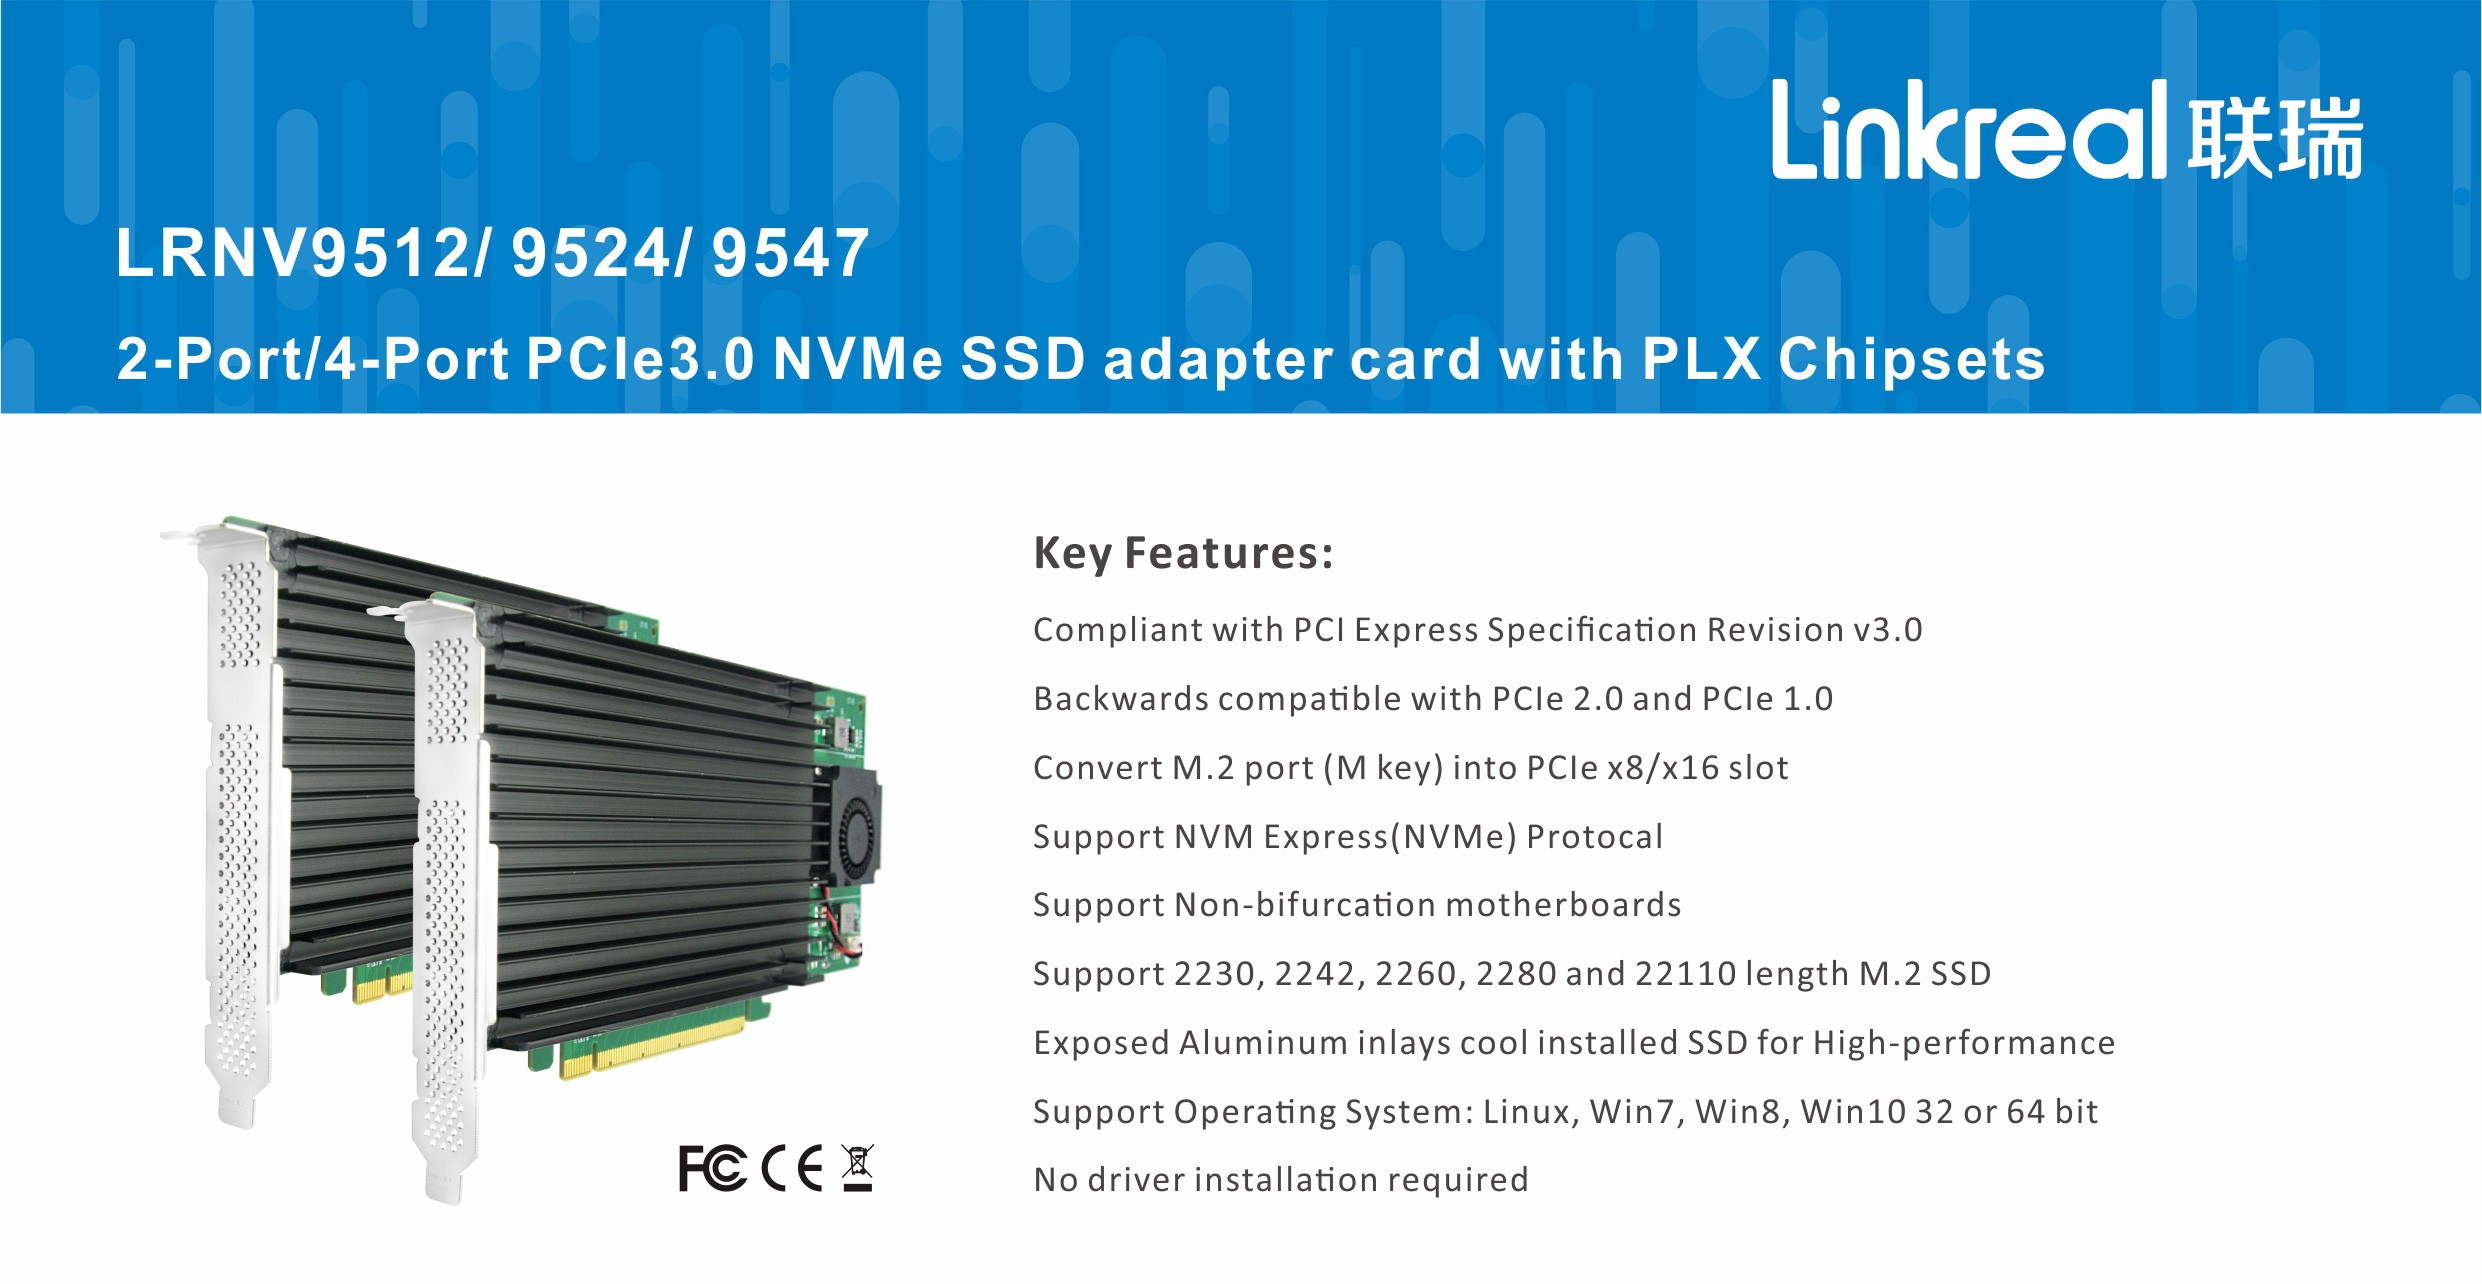 New Developed Products with SSD on Boards